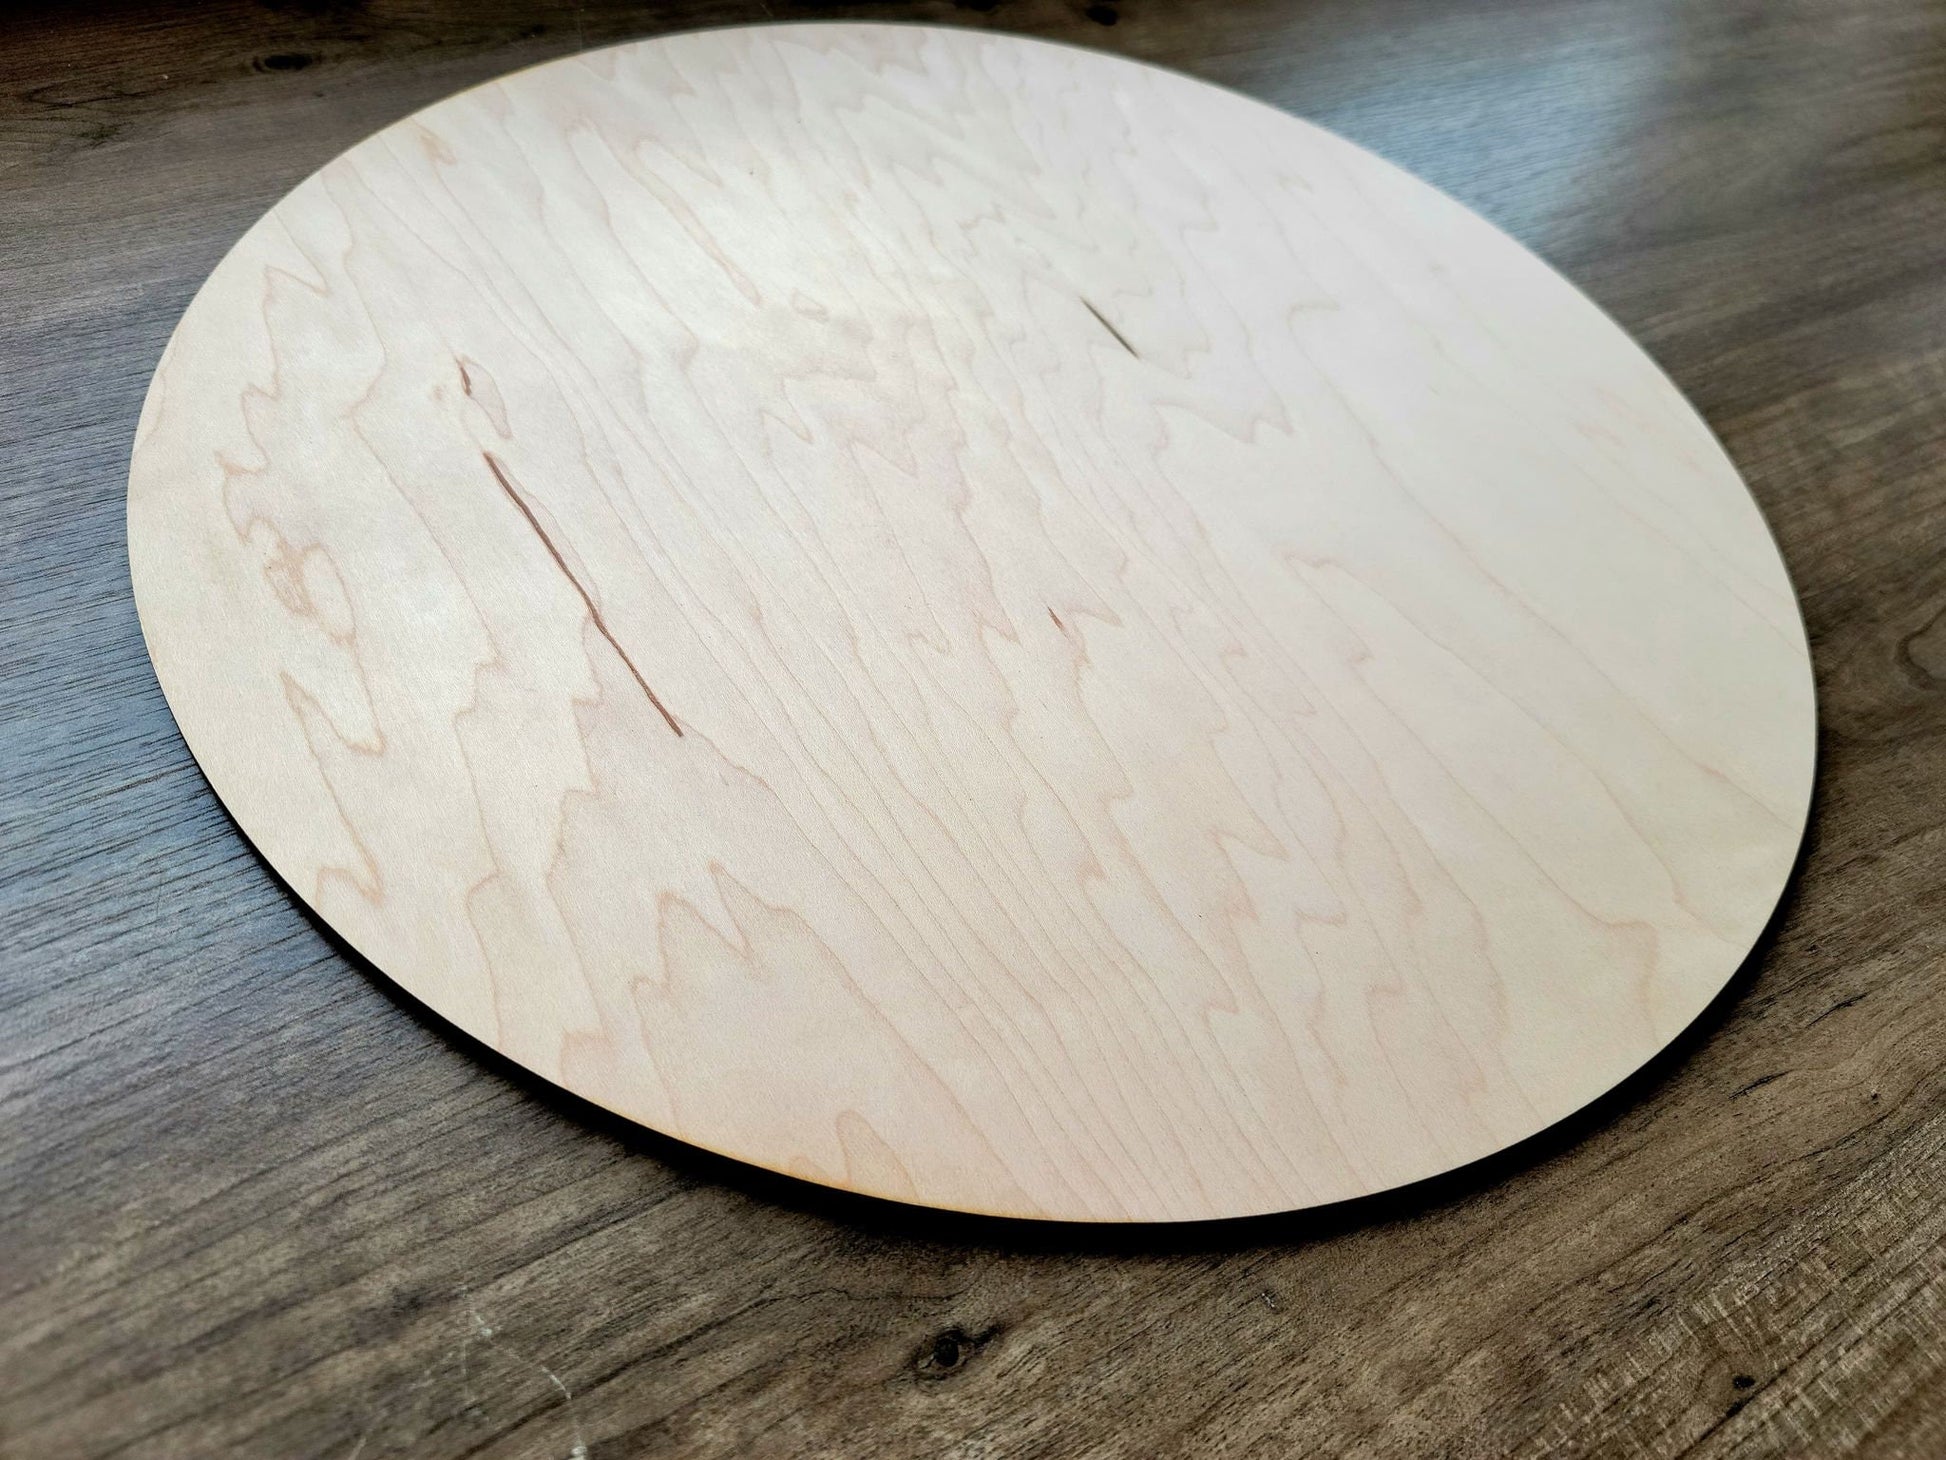 CIRCLE wood sign blank for engraving, painting, wood burning, Ready to Finish, DIY sign making, crafting, unfinished sign backers 1/4" thick